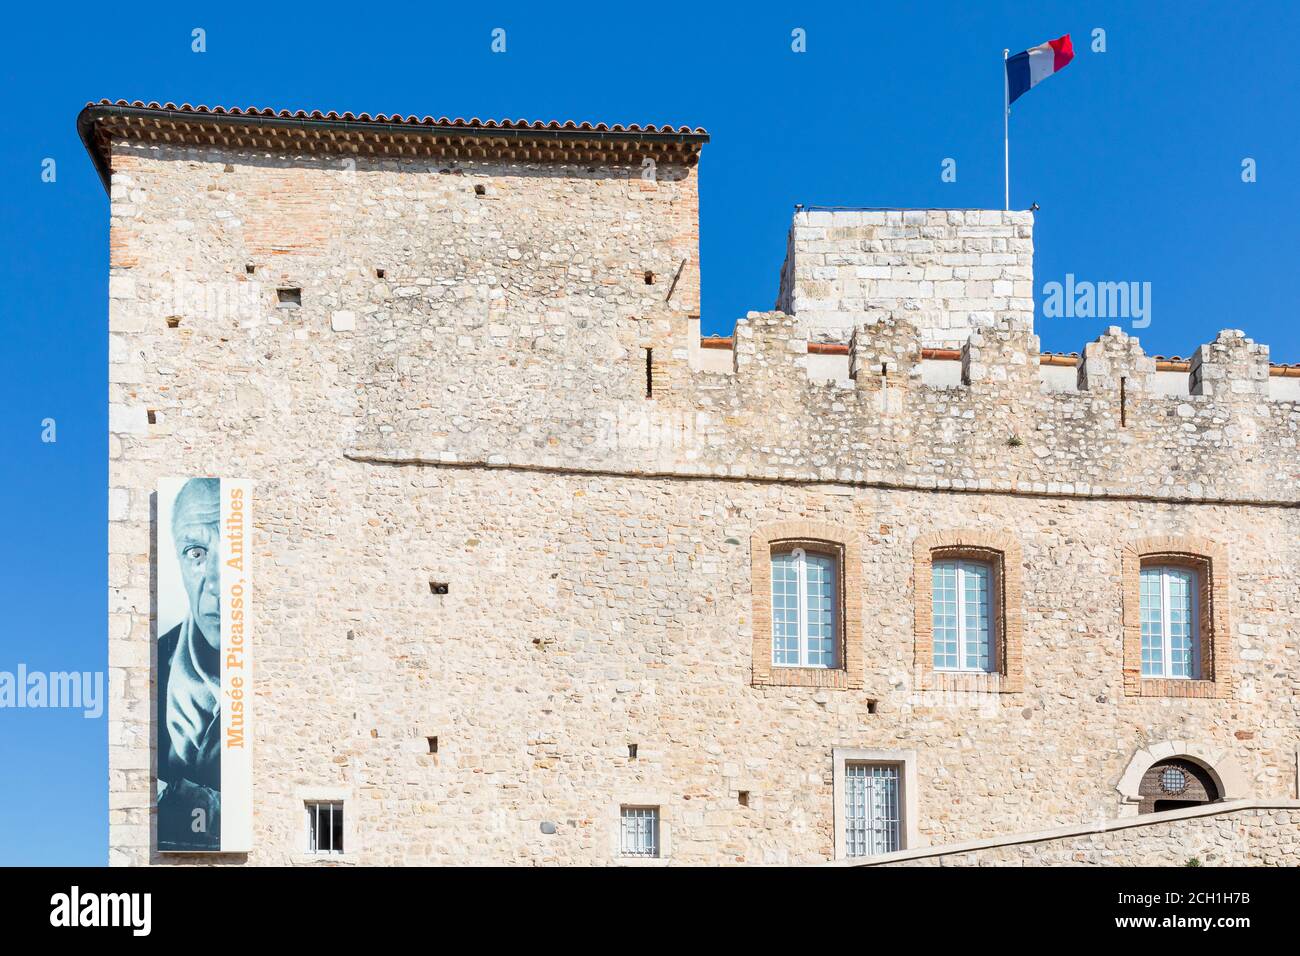 Il Musée Picasso; Museo Picasso, Antibes, Alpes-Maritimes, Francia Foto Stock